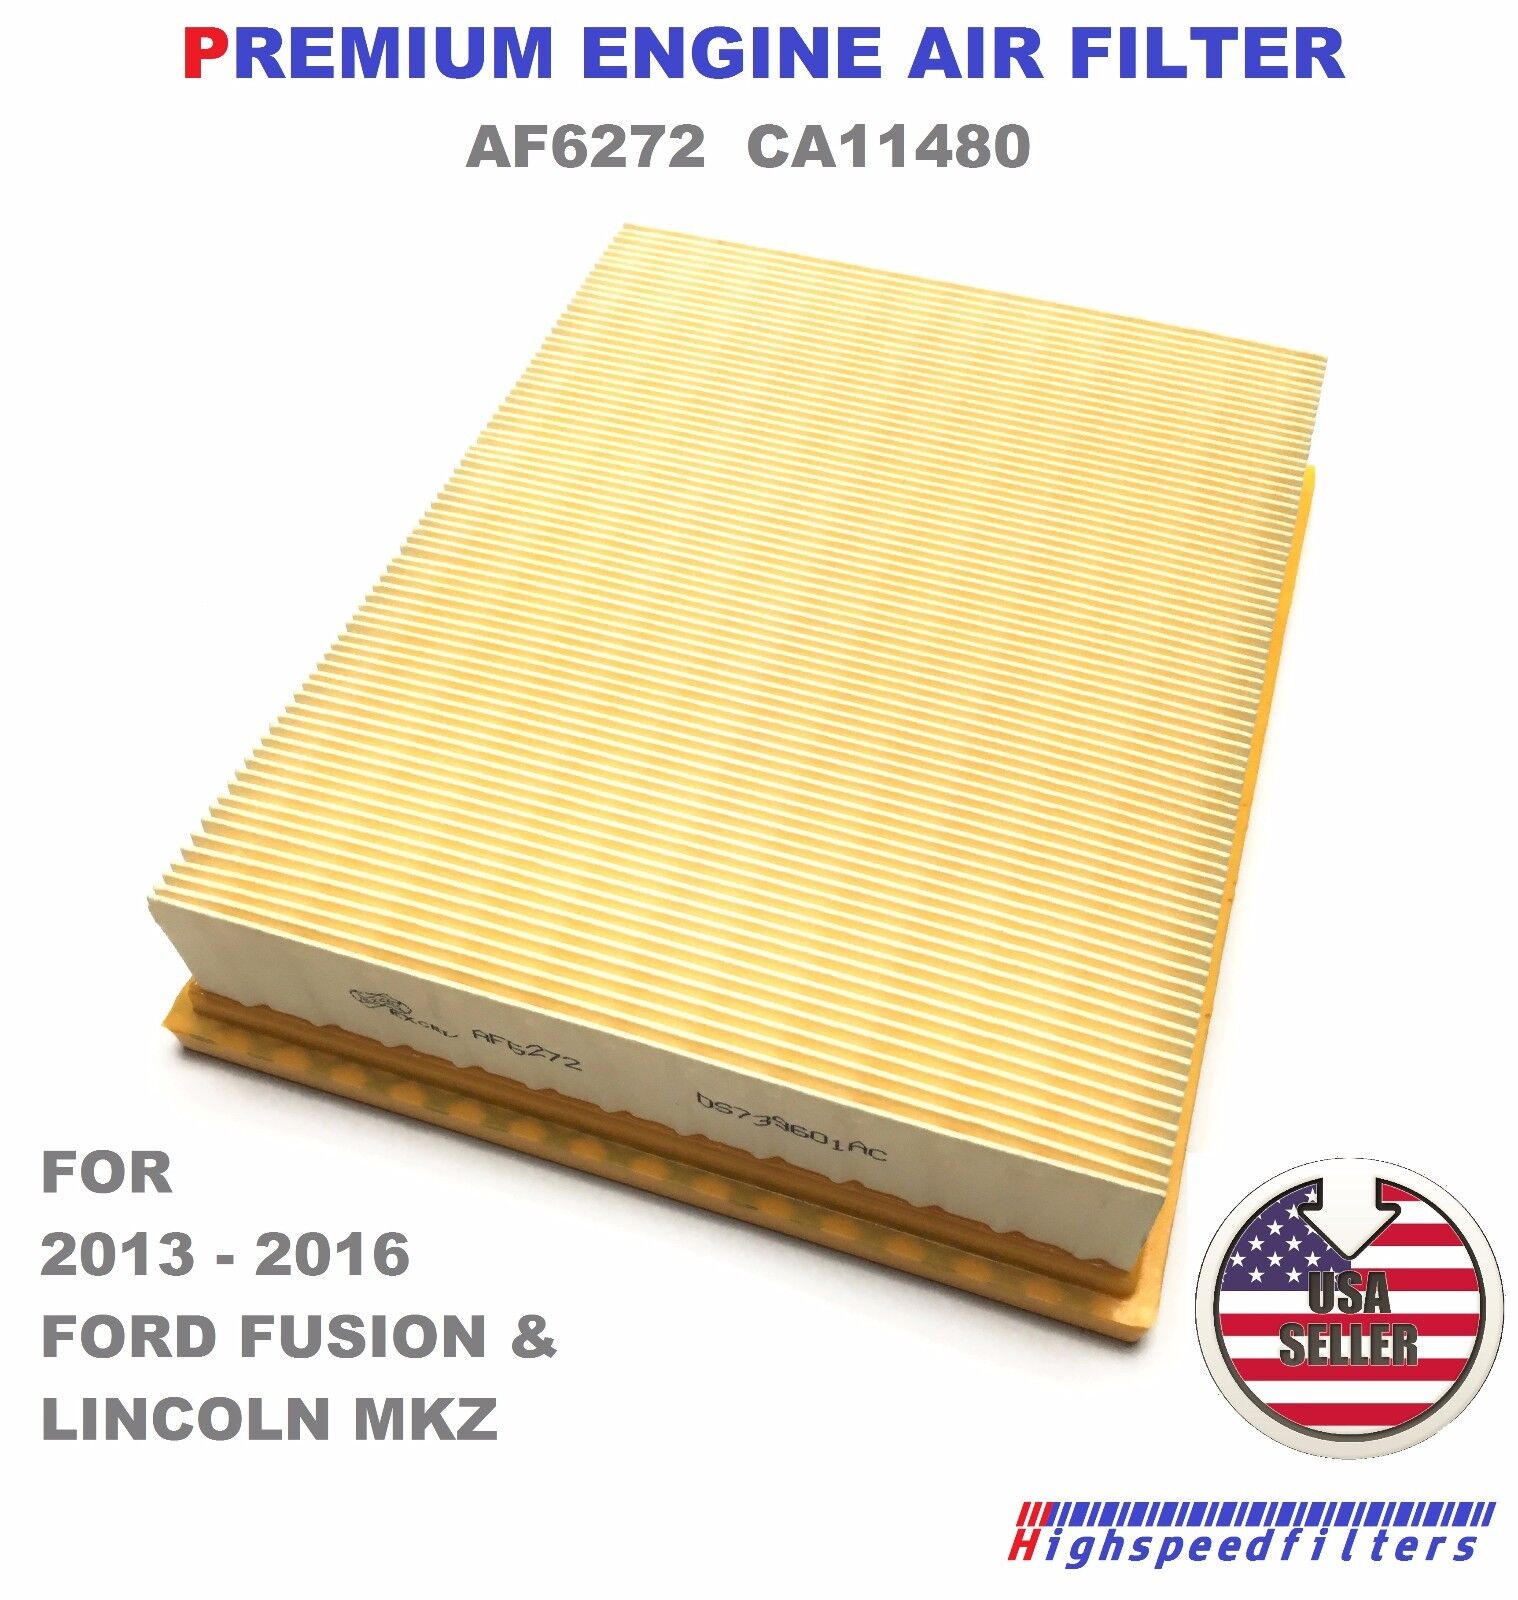 AF6272 PREMIUM ENGINE AIR FILTER For Ford GT Edge Fusion Lincoln MKZ MKX CA11480